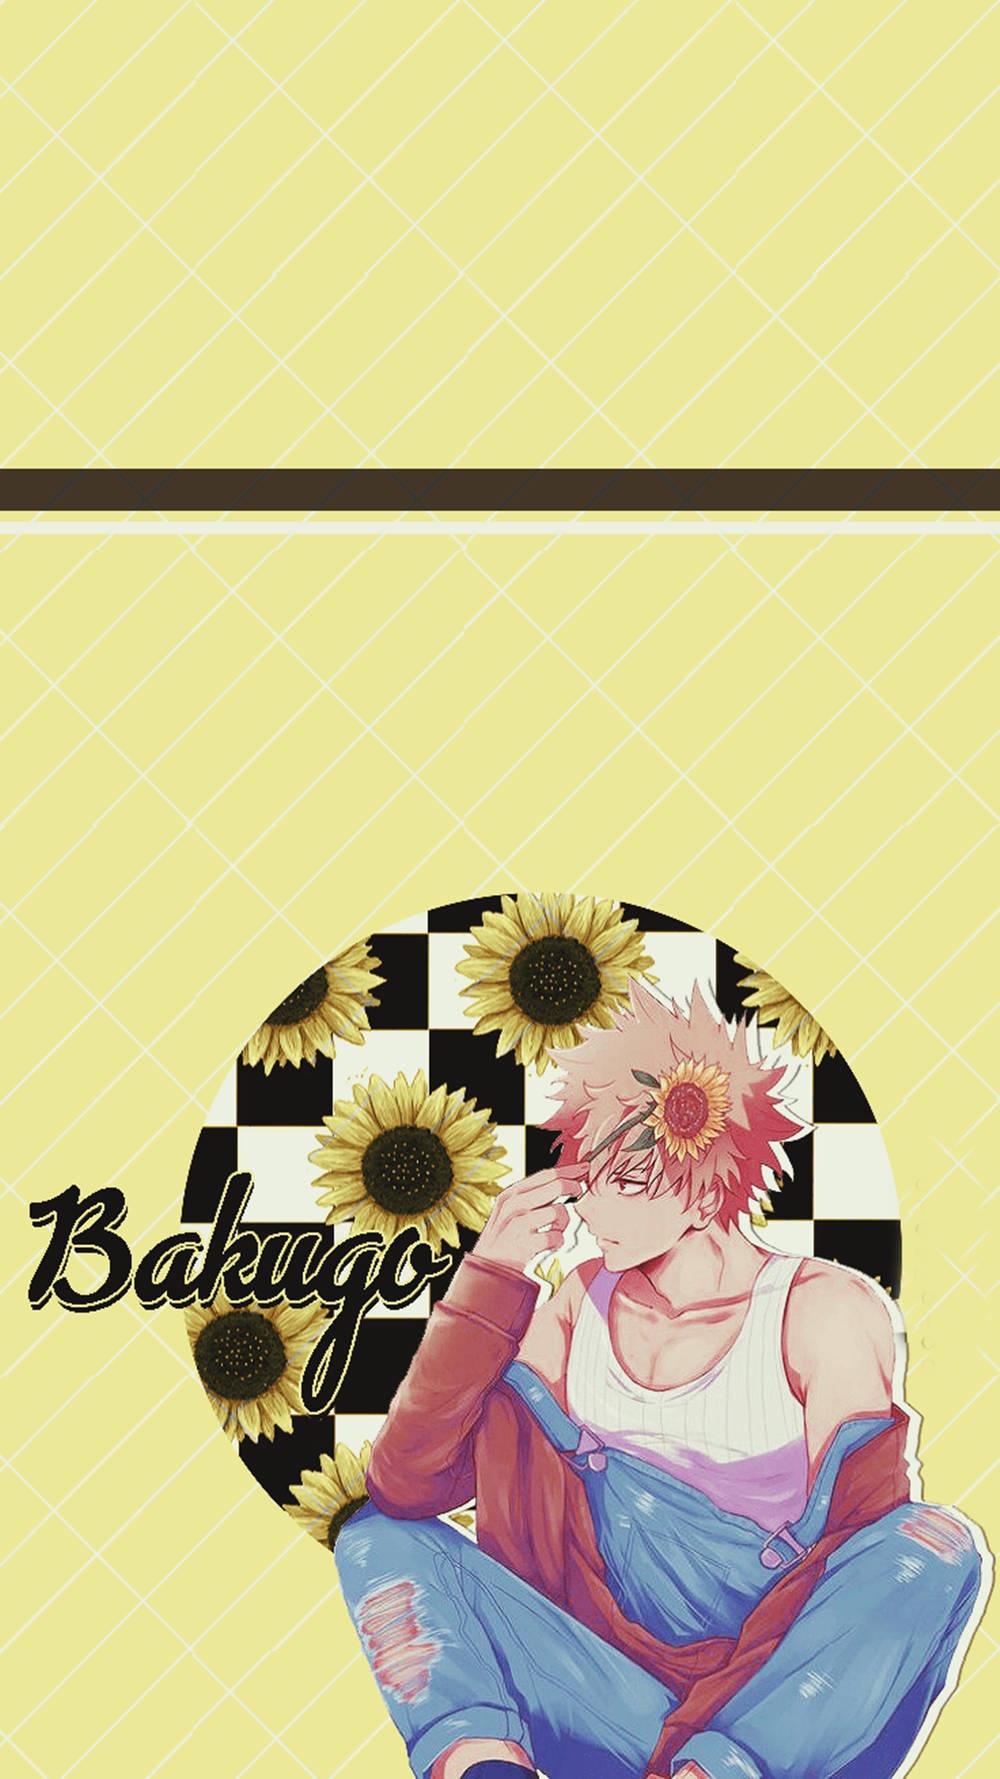 Life Is Too Short To Be Serious All The Time – Cute Bakugou